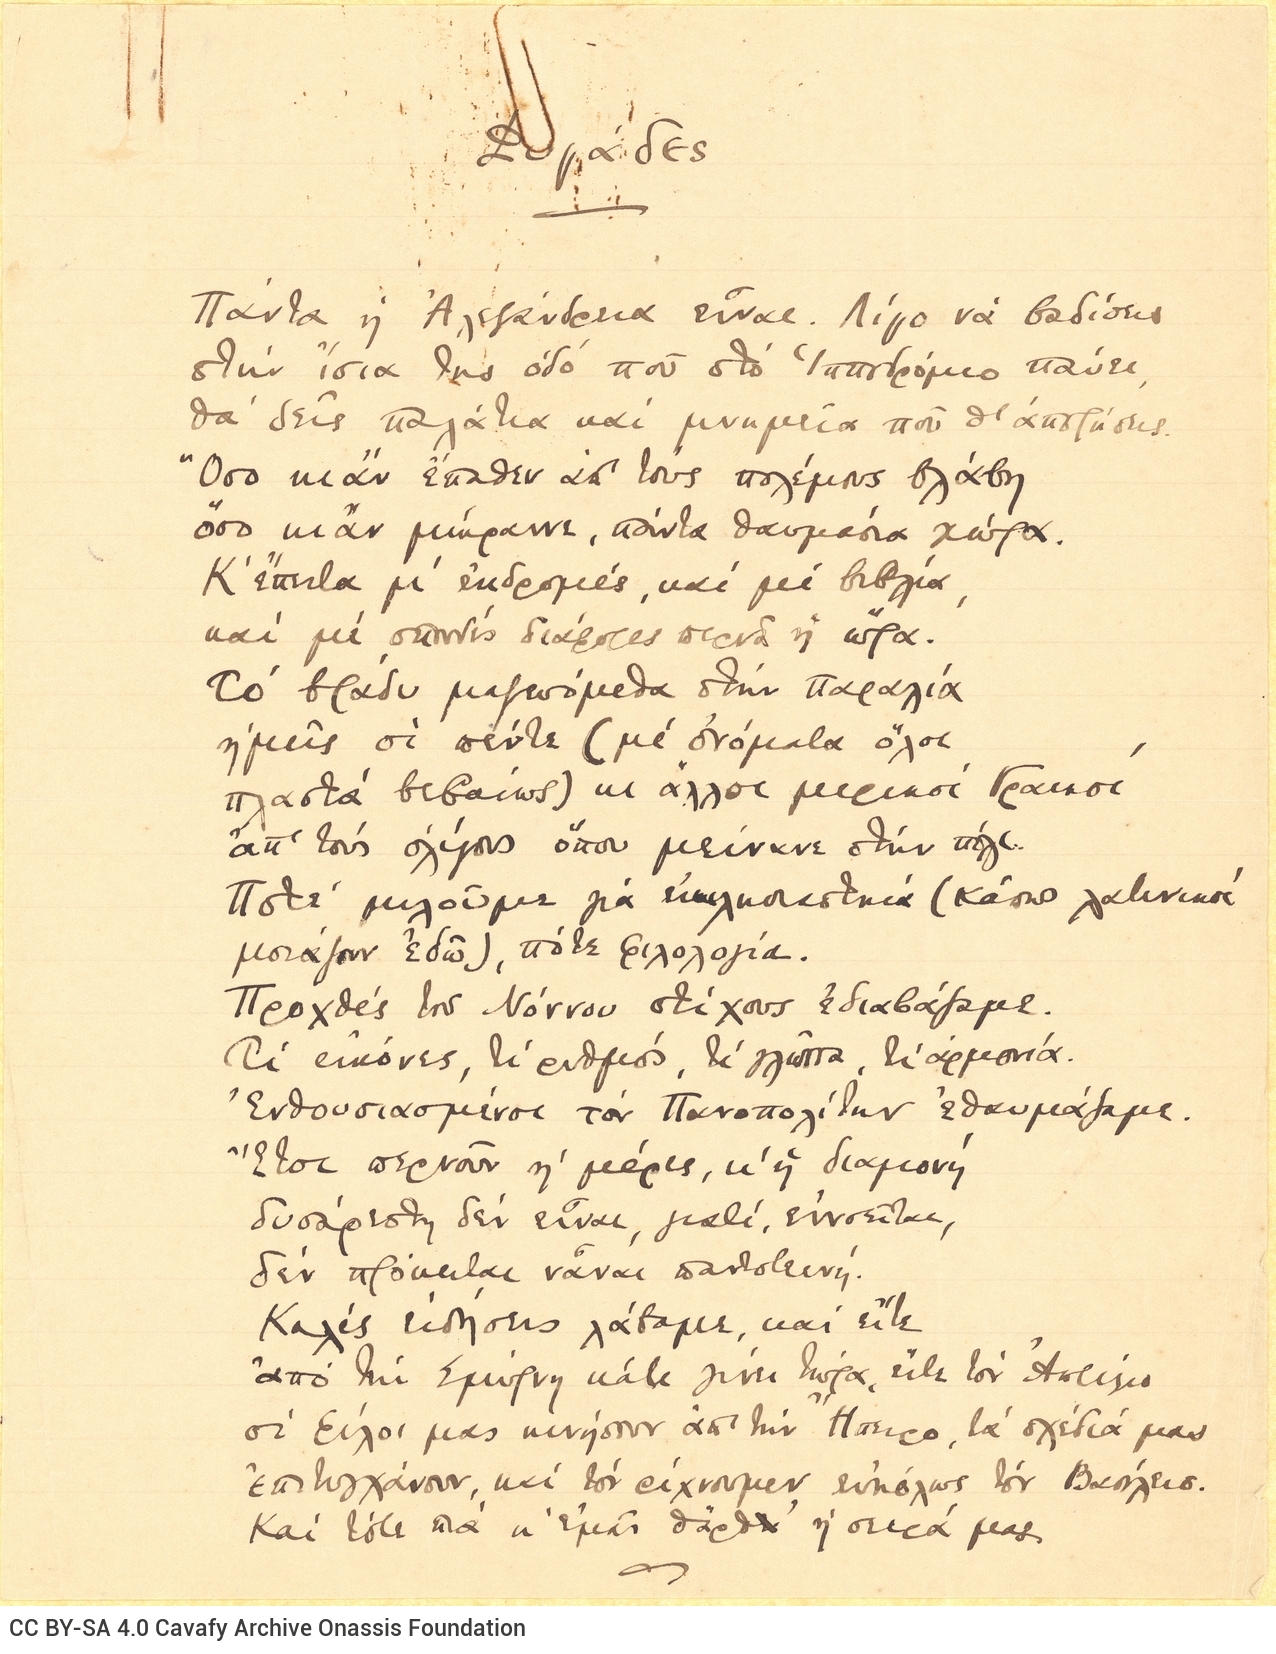 Manuscript of a poem and notes. The poem "Fugitives" in a ruled sheet. Verses and notes on either side of a cut piece of p